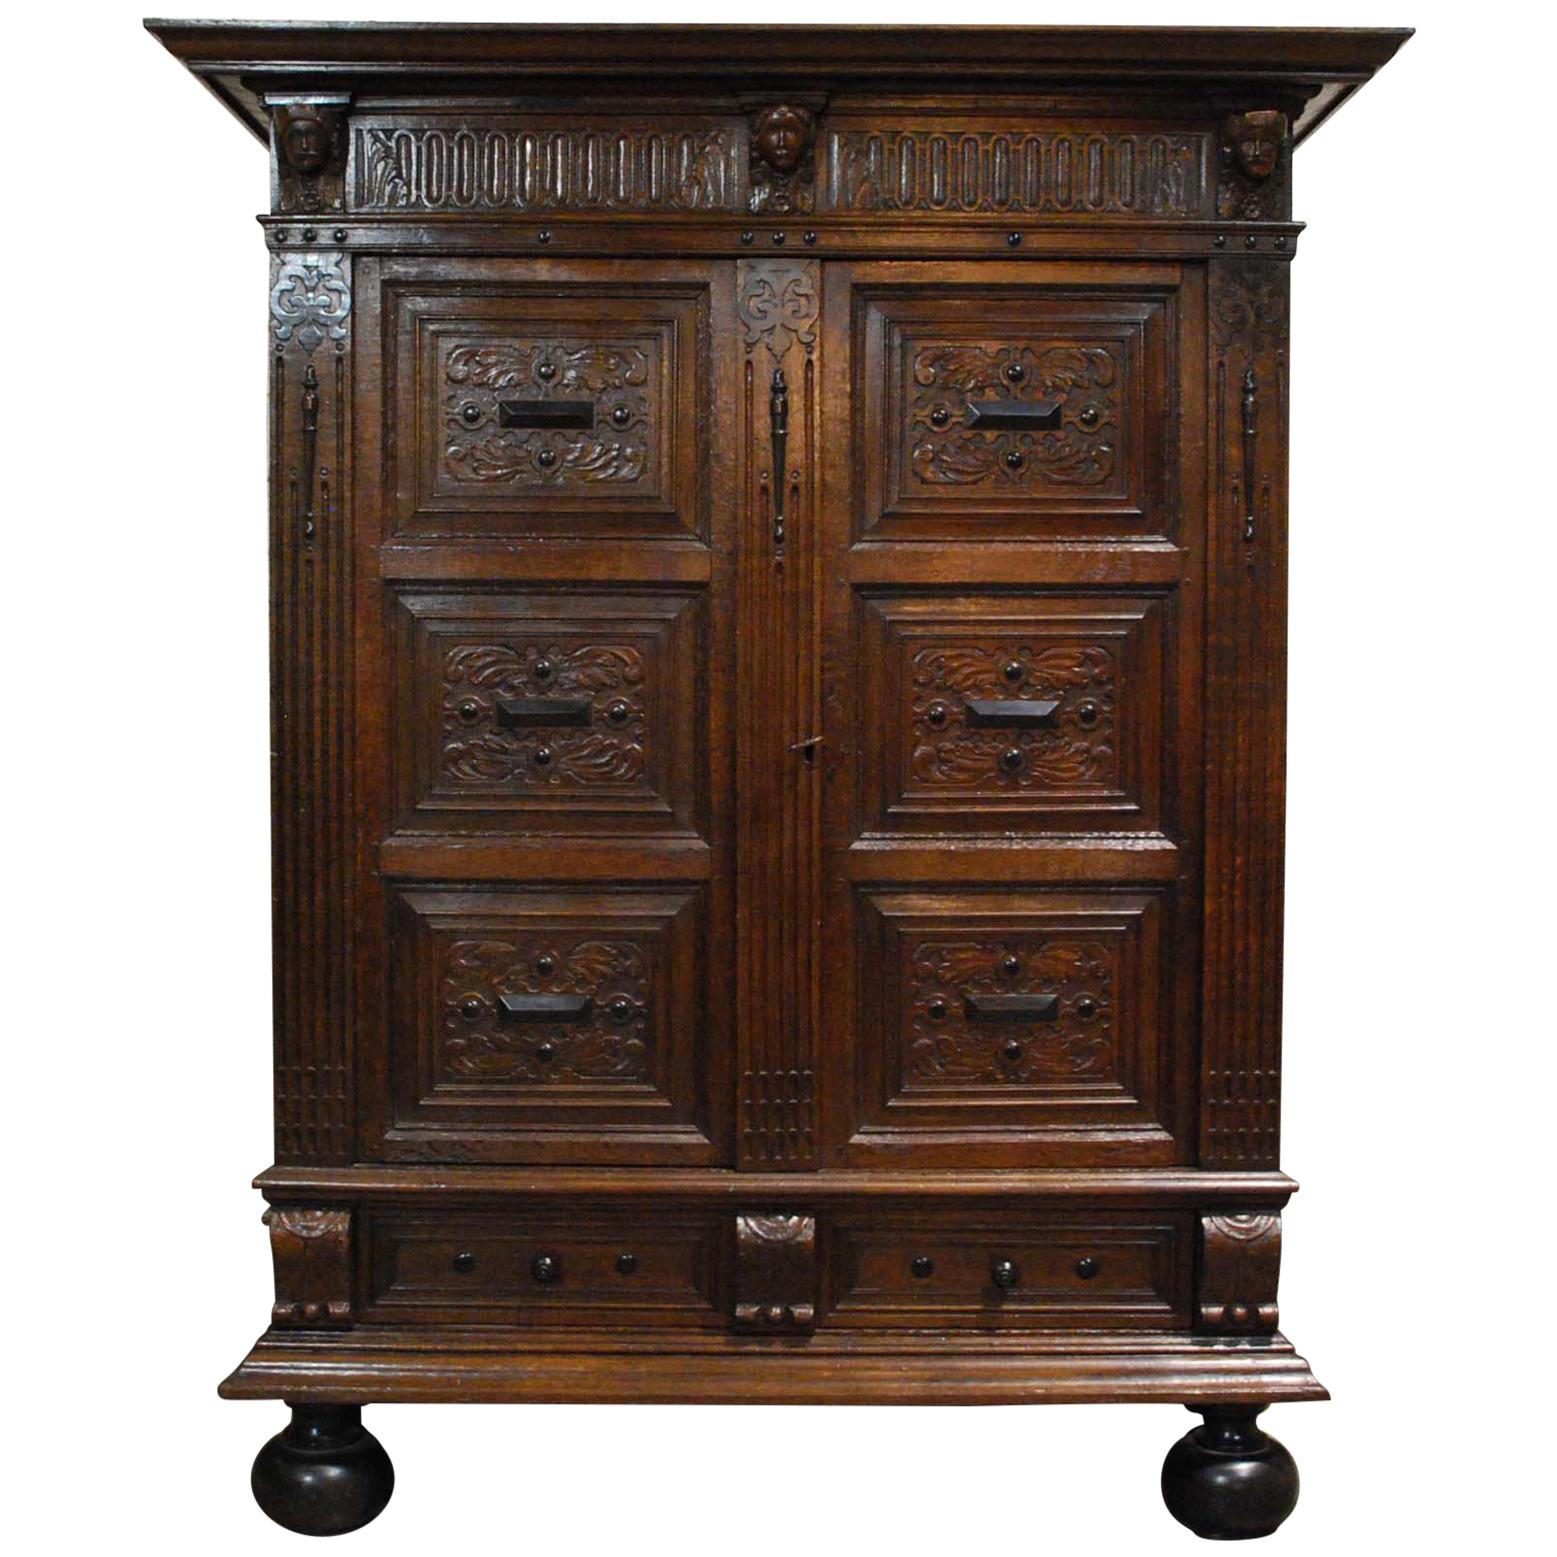 Antique 17th Century Dutch Renaissance Cabinet with Hand Carved Ornaments